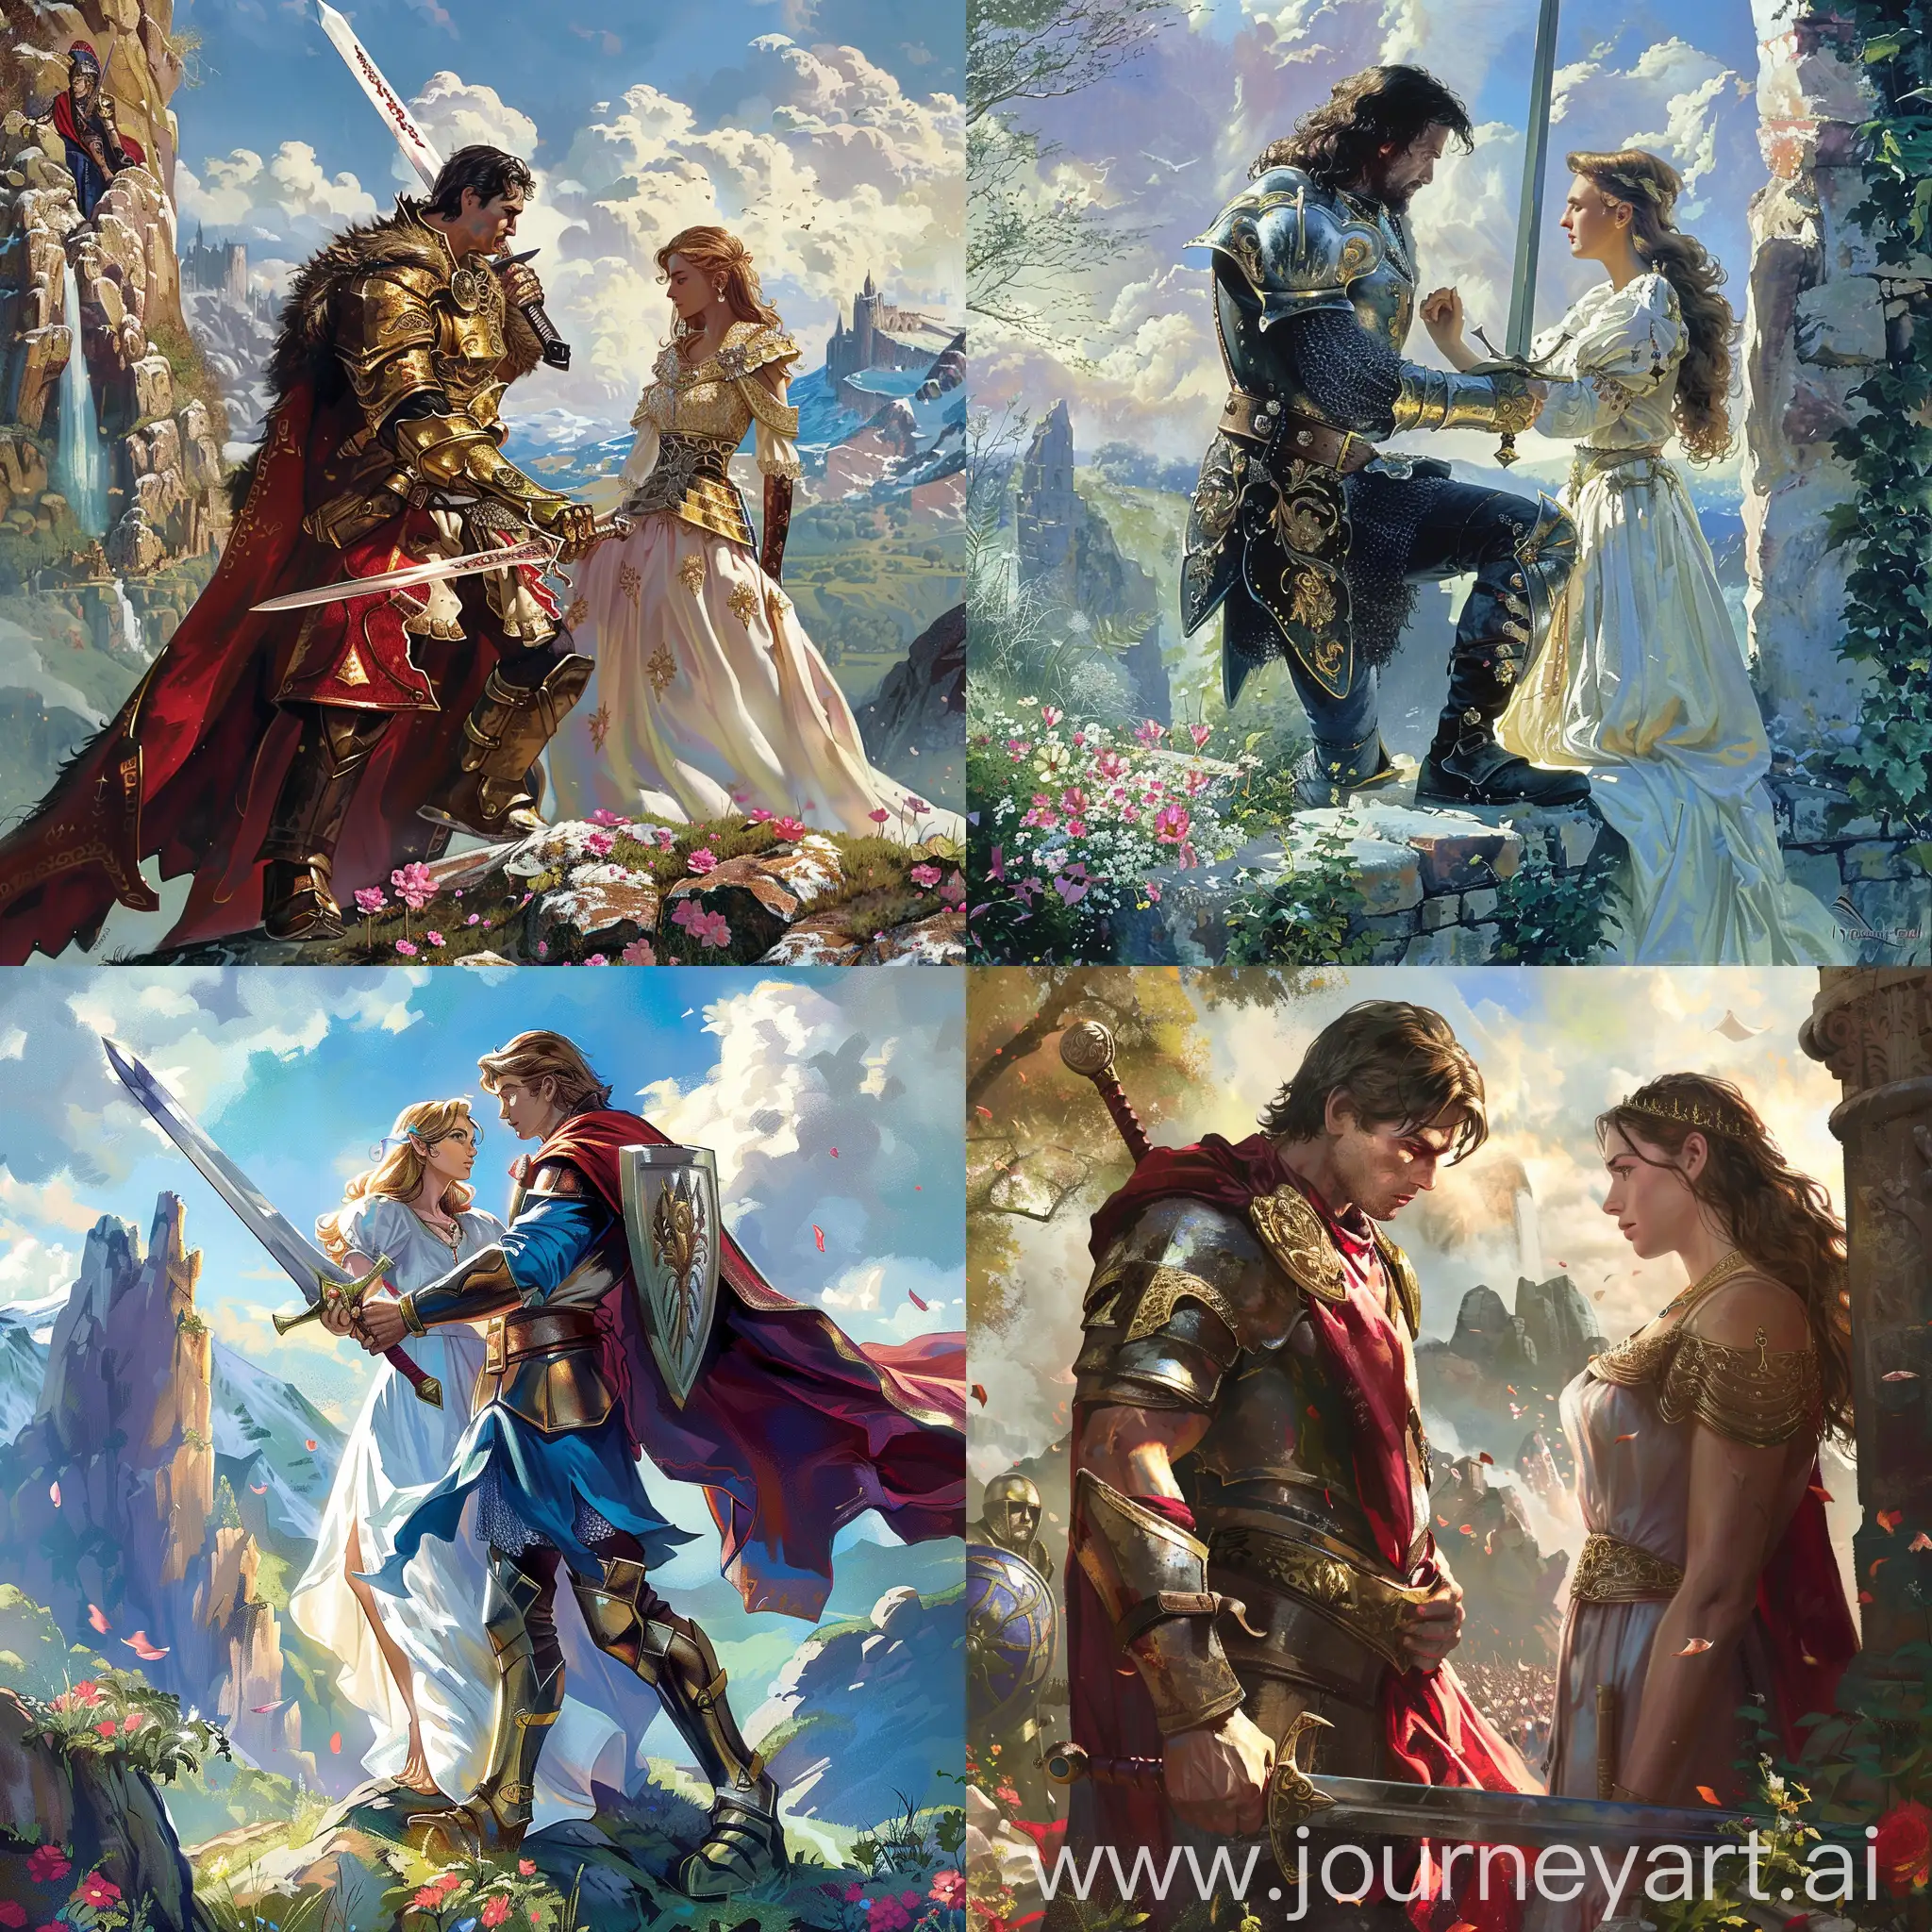 Hero-Rescuing-Princess-with-Sword-in-Dramatic-Scene